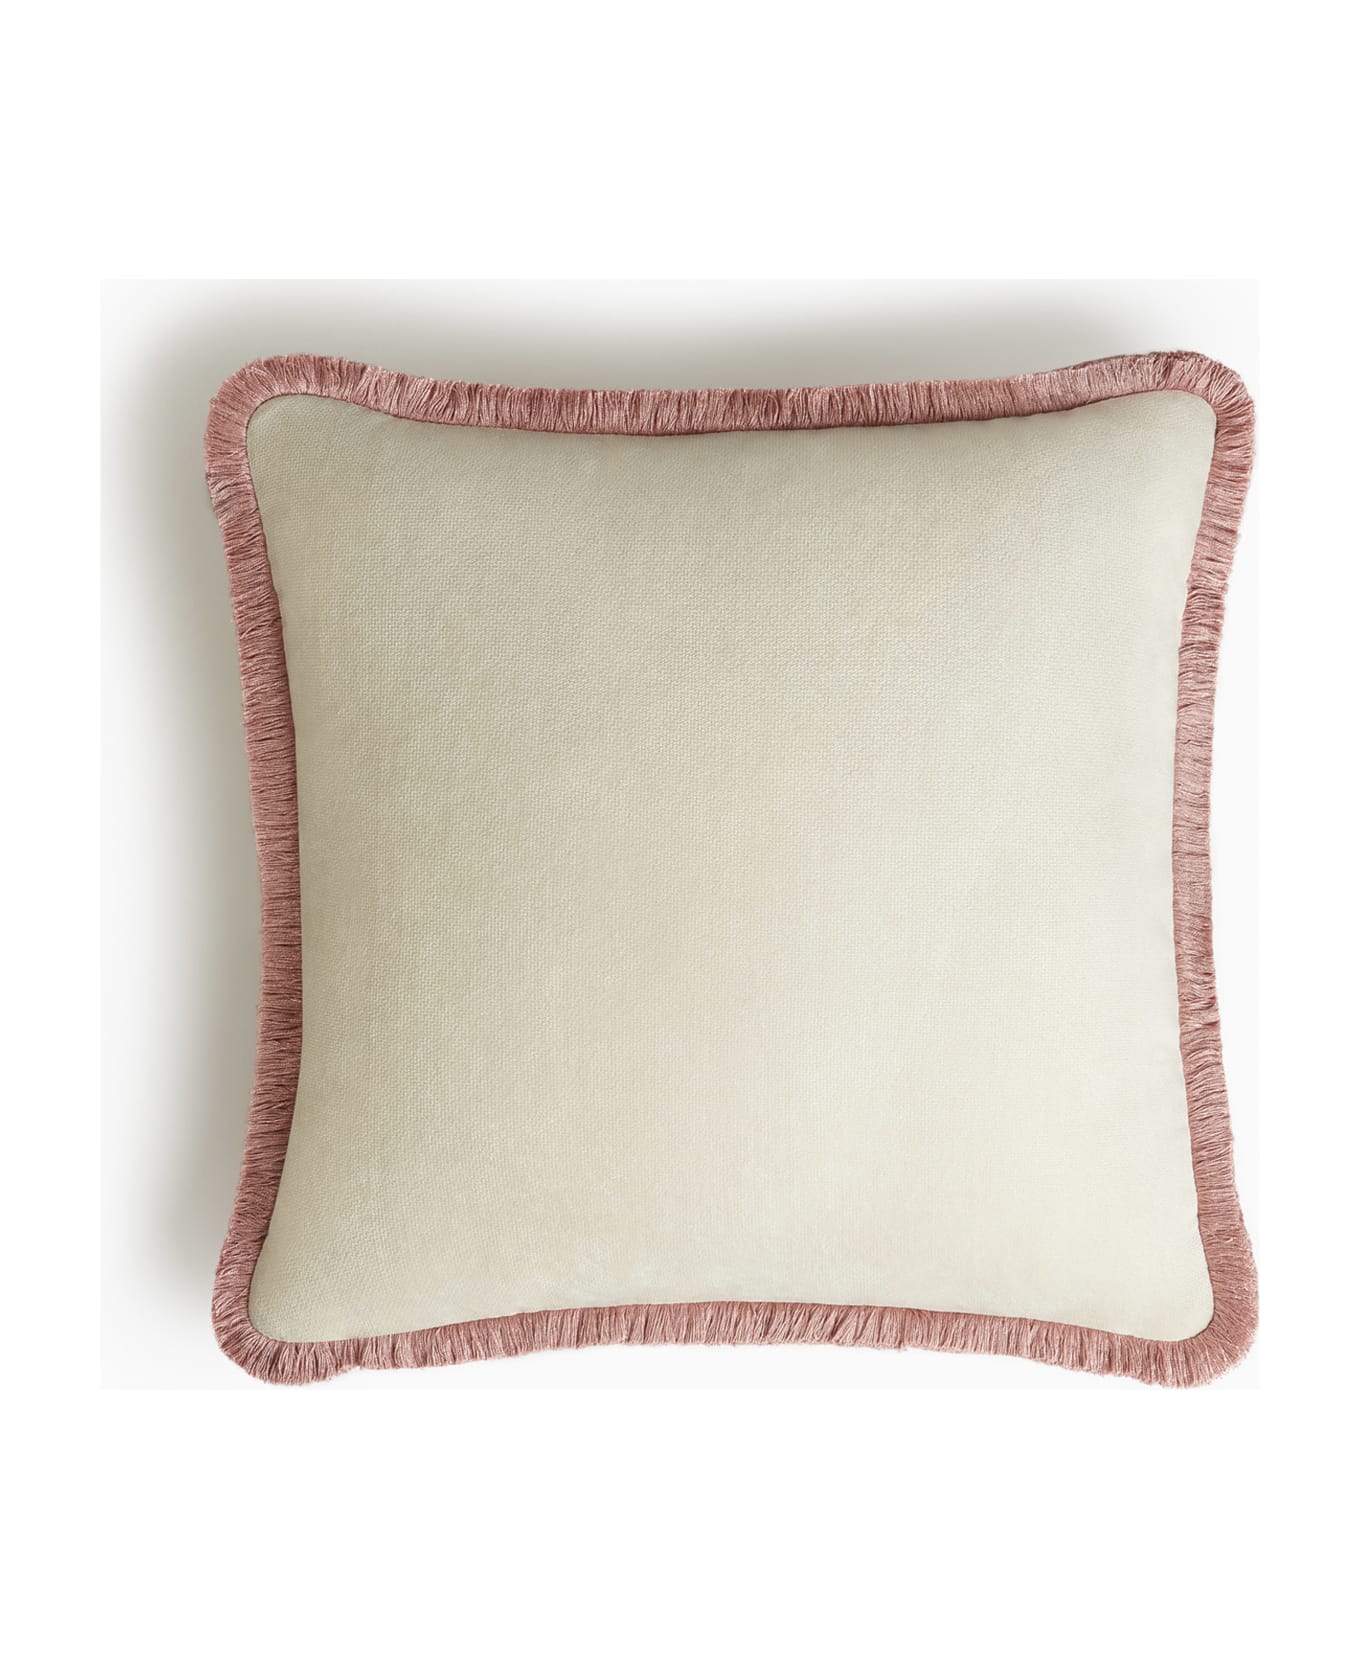 Lo Decor Happy Pillow Dirty White Velvet Pink Fringes - dirty white / pink